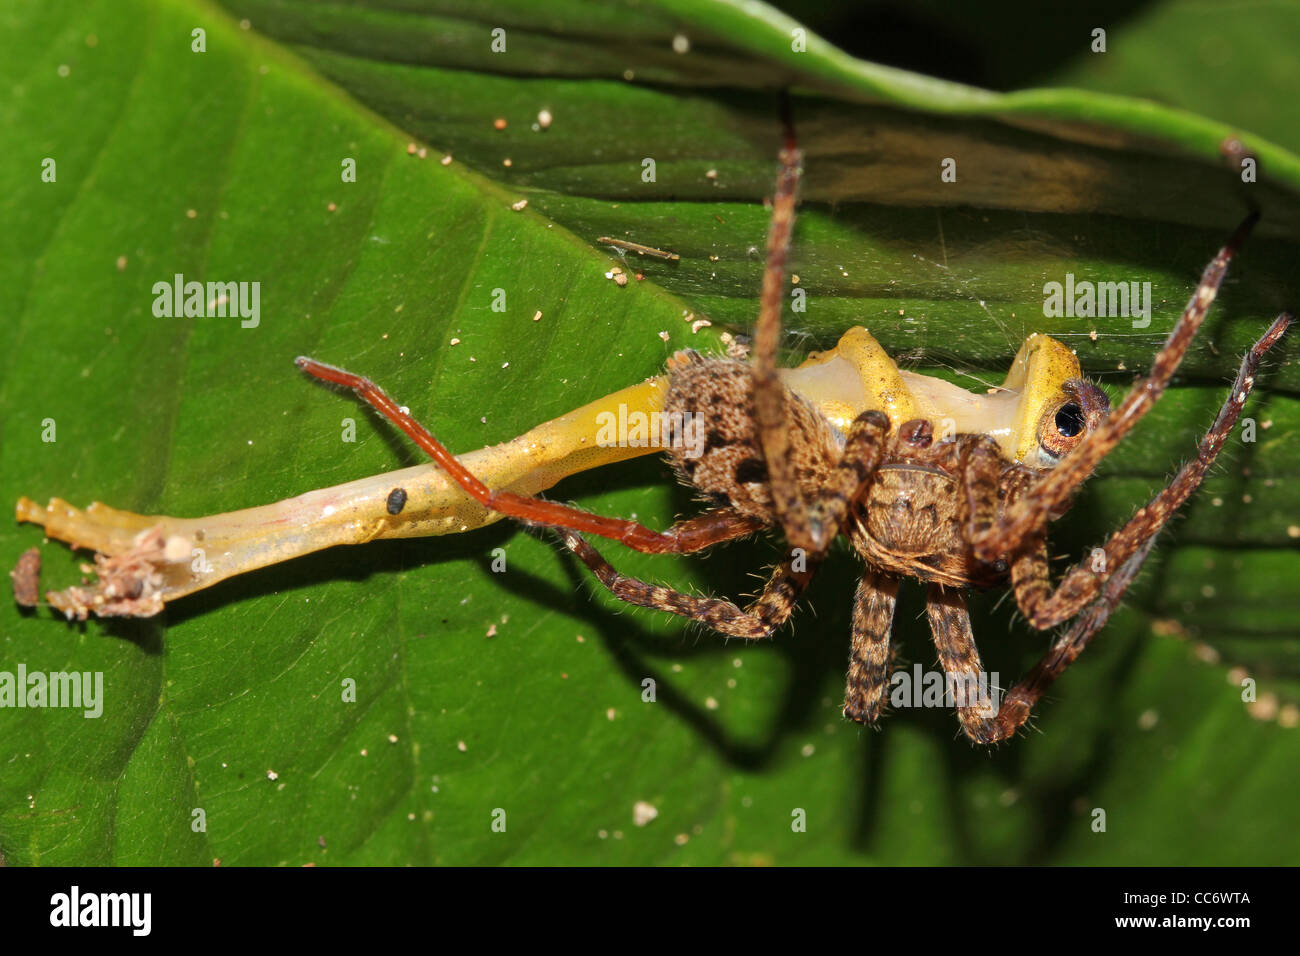 A Spider eats a Frog in the Peruvian Amazon! Stock Photo